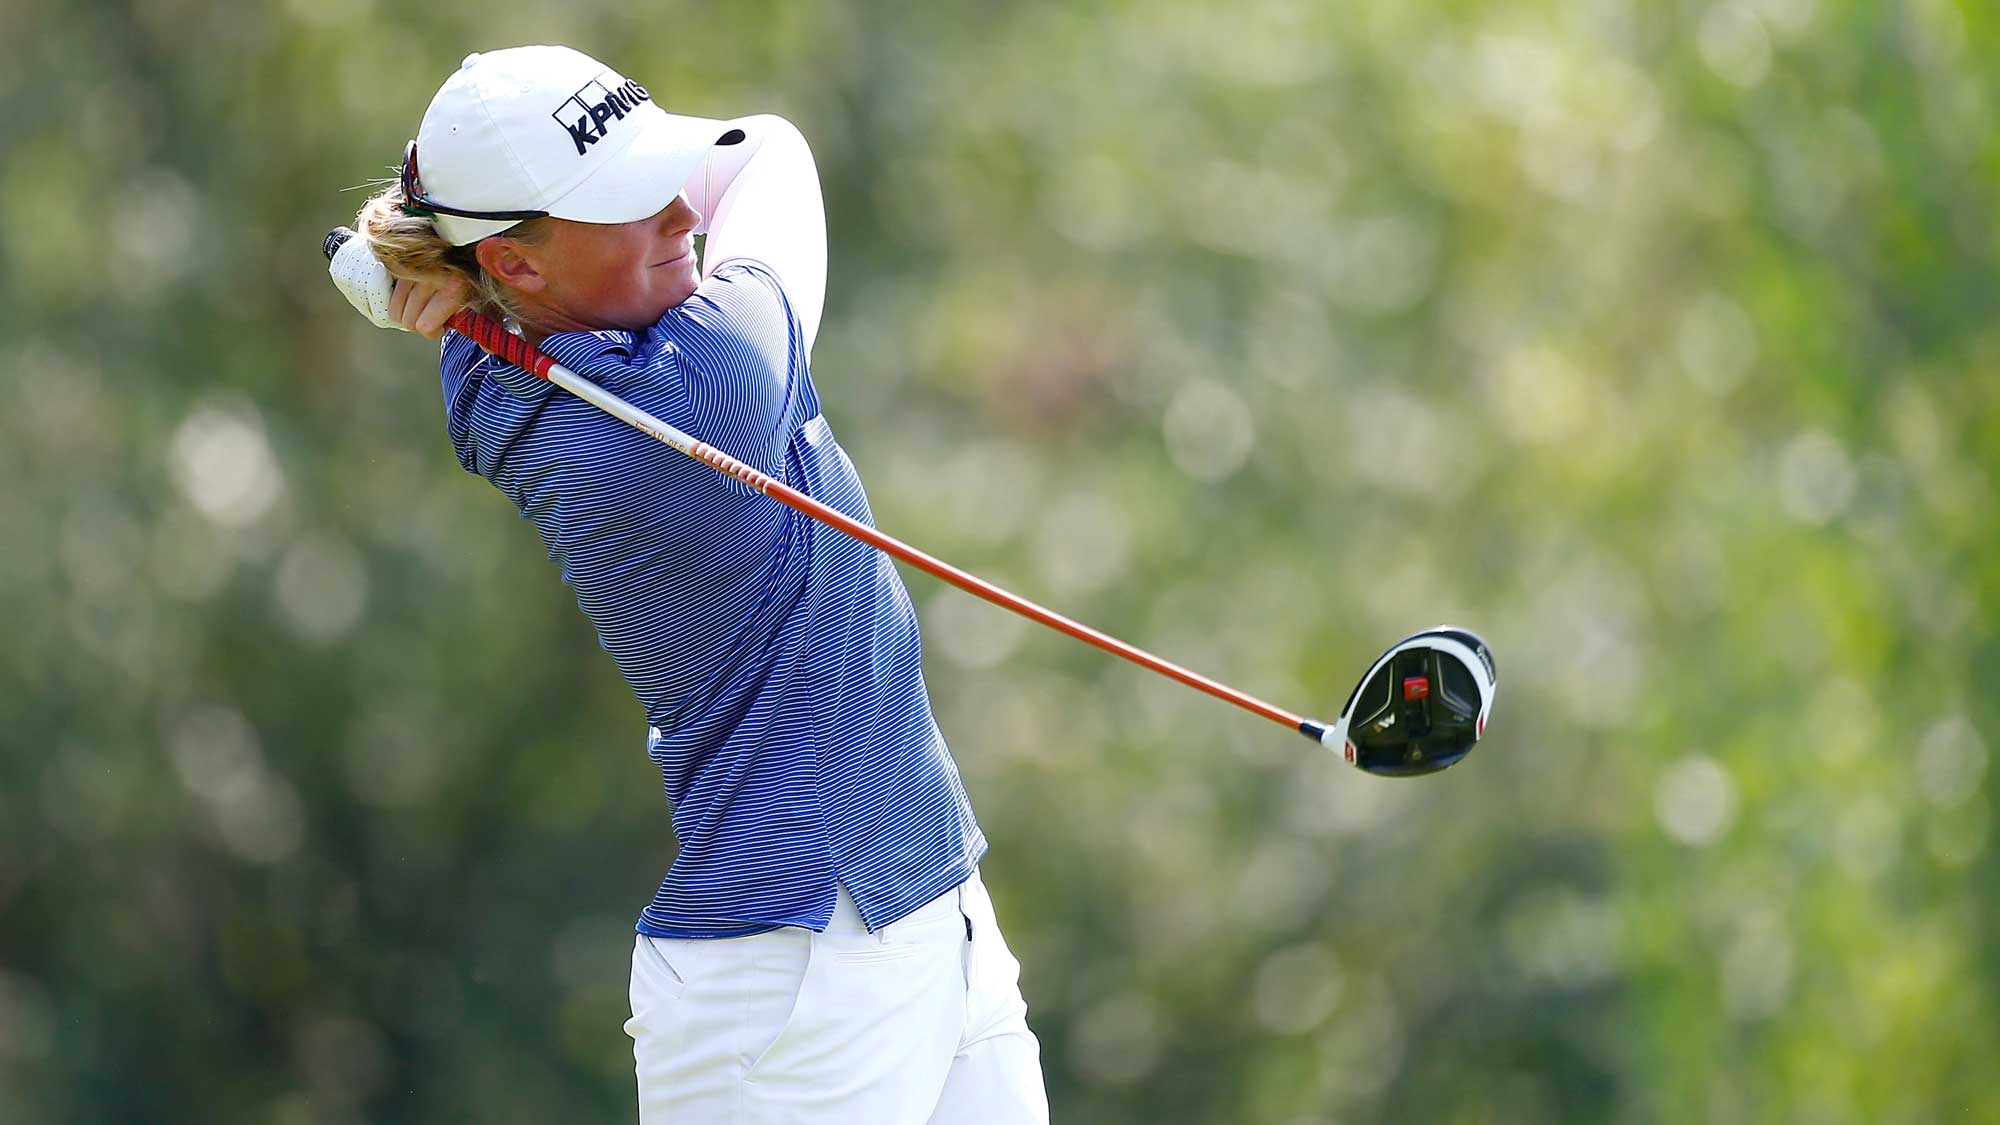 Stacy Lewis tees off on the 6th hole during the final round of the LPGA Cambia Portland Classic